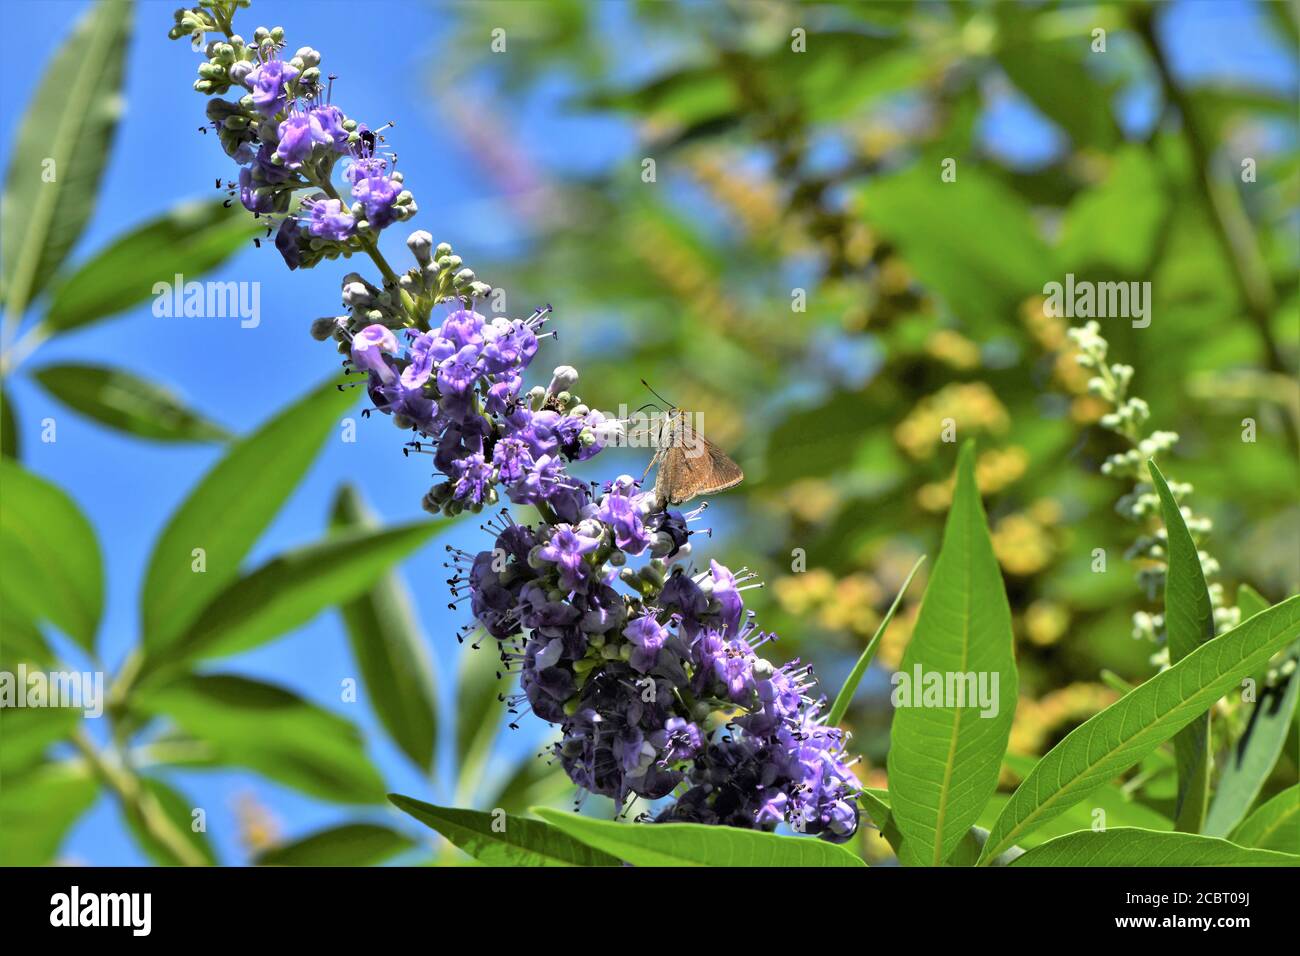 A small brown butterfly on a wisteria bush. Stock Photo